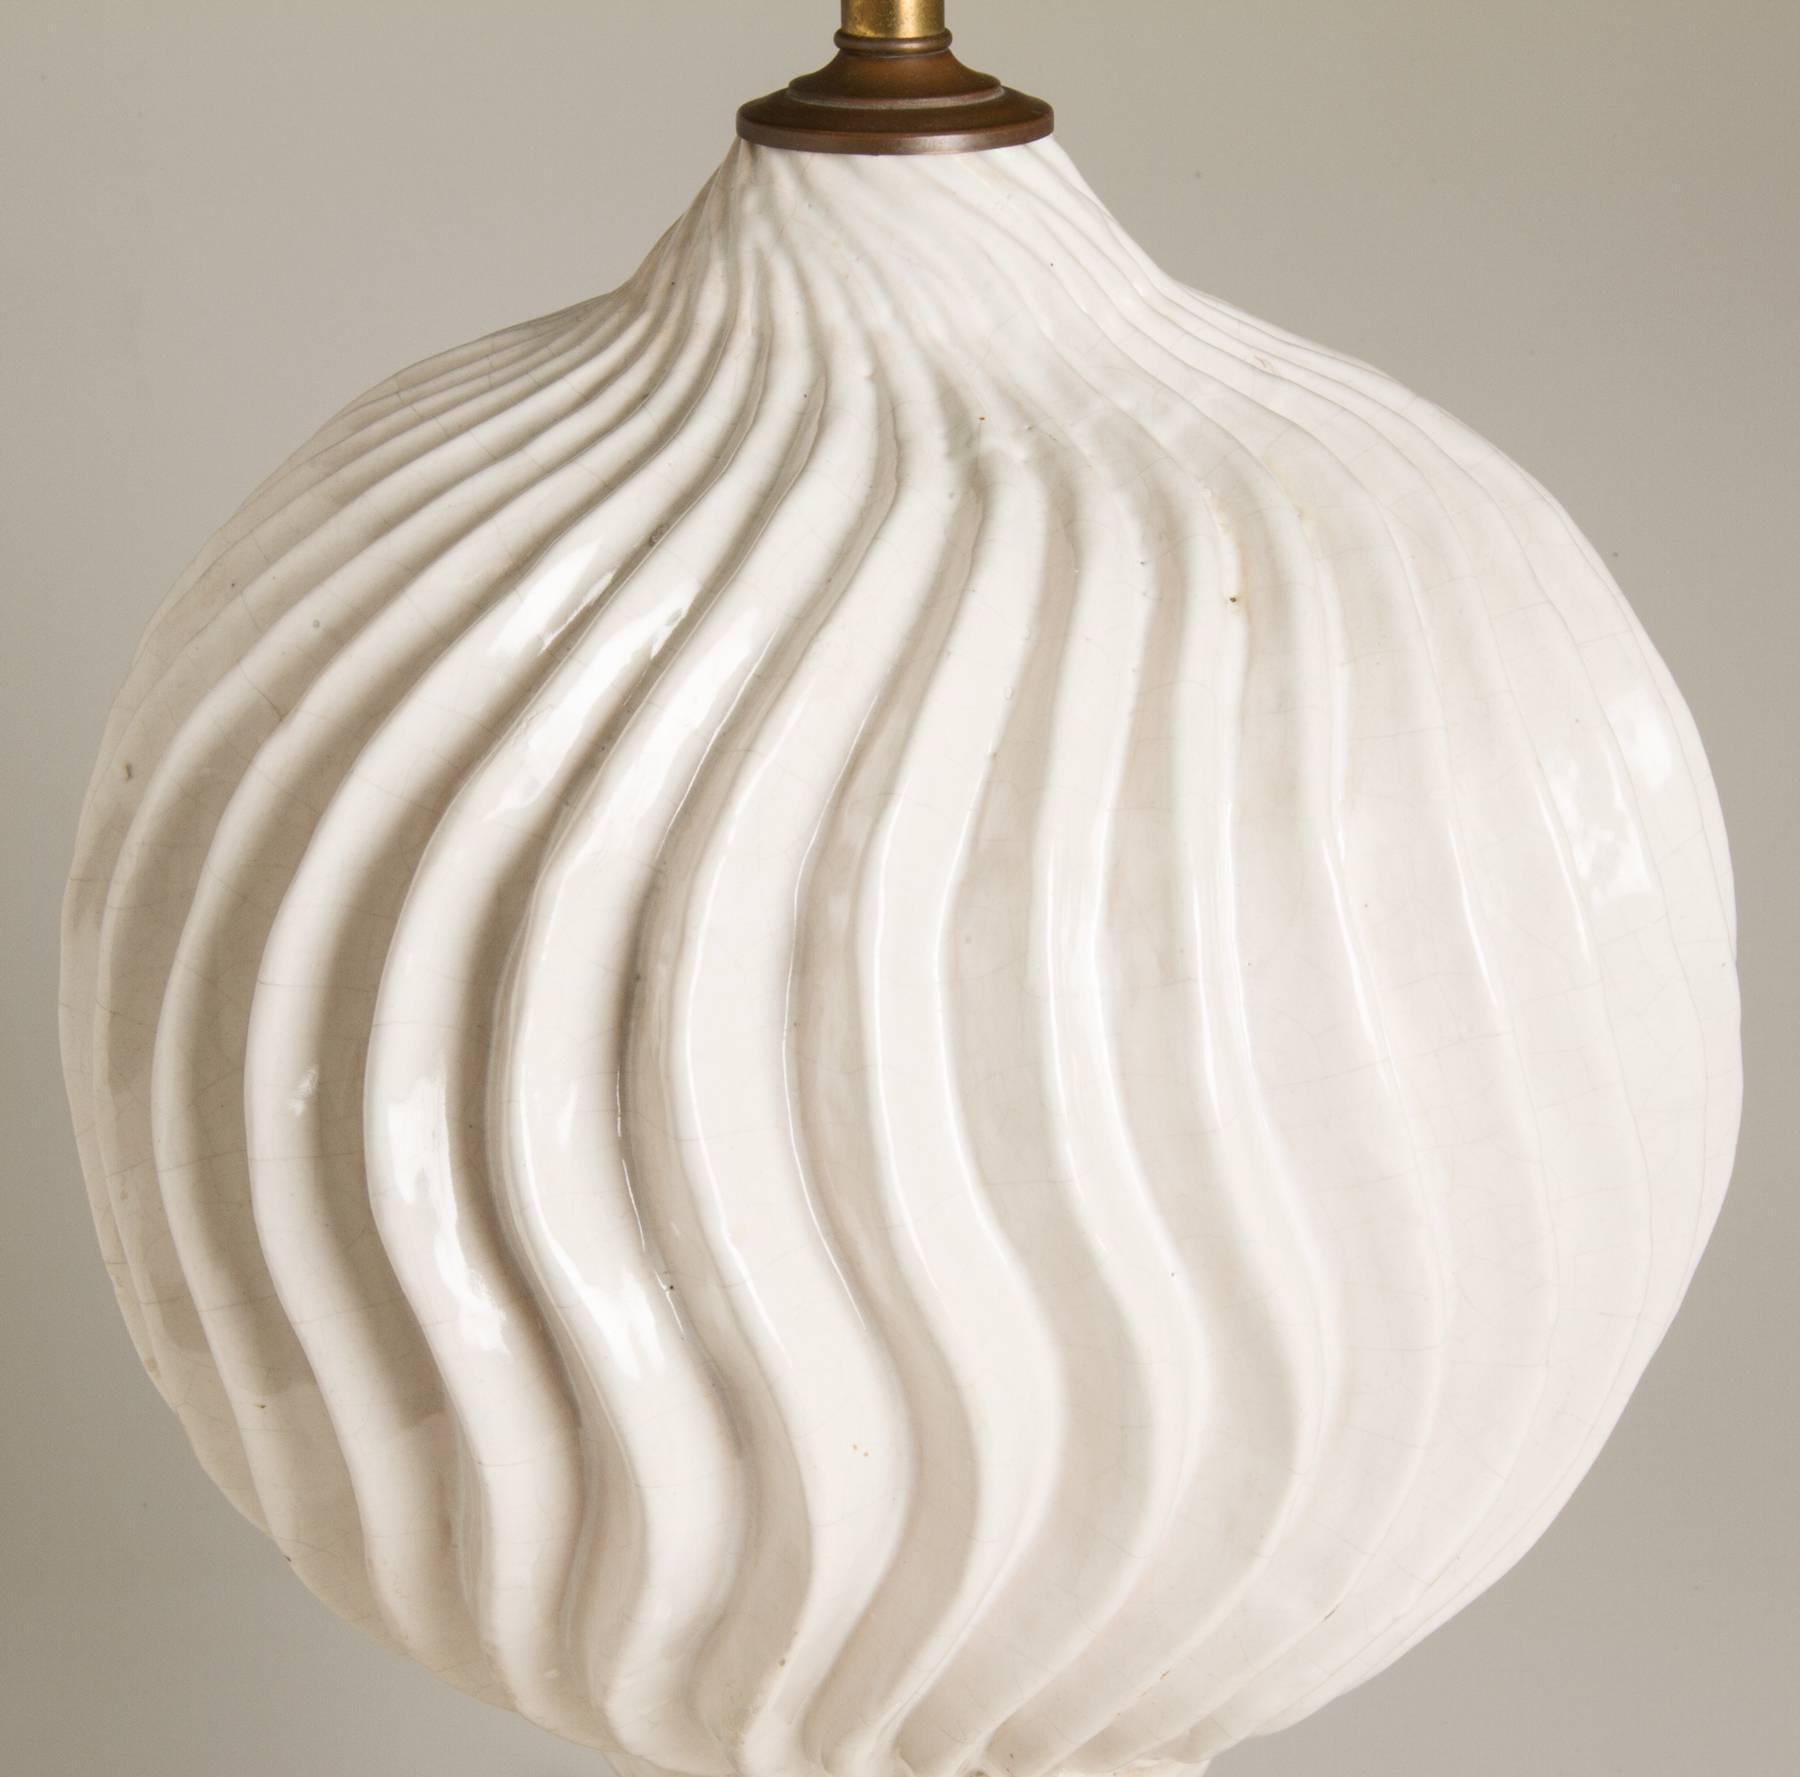 This is a large and sculptural lamp with its matching original finial, having a white crackle glaze and a big presence.